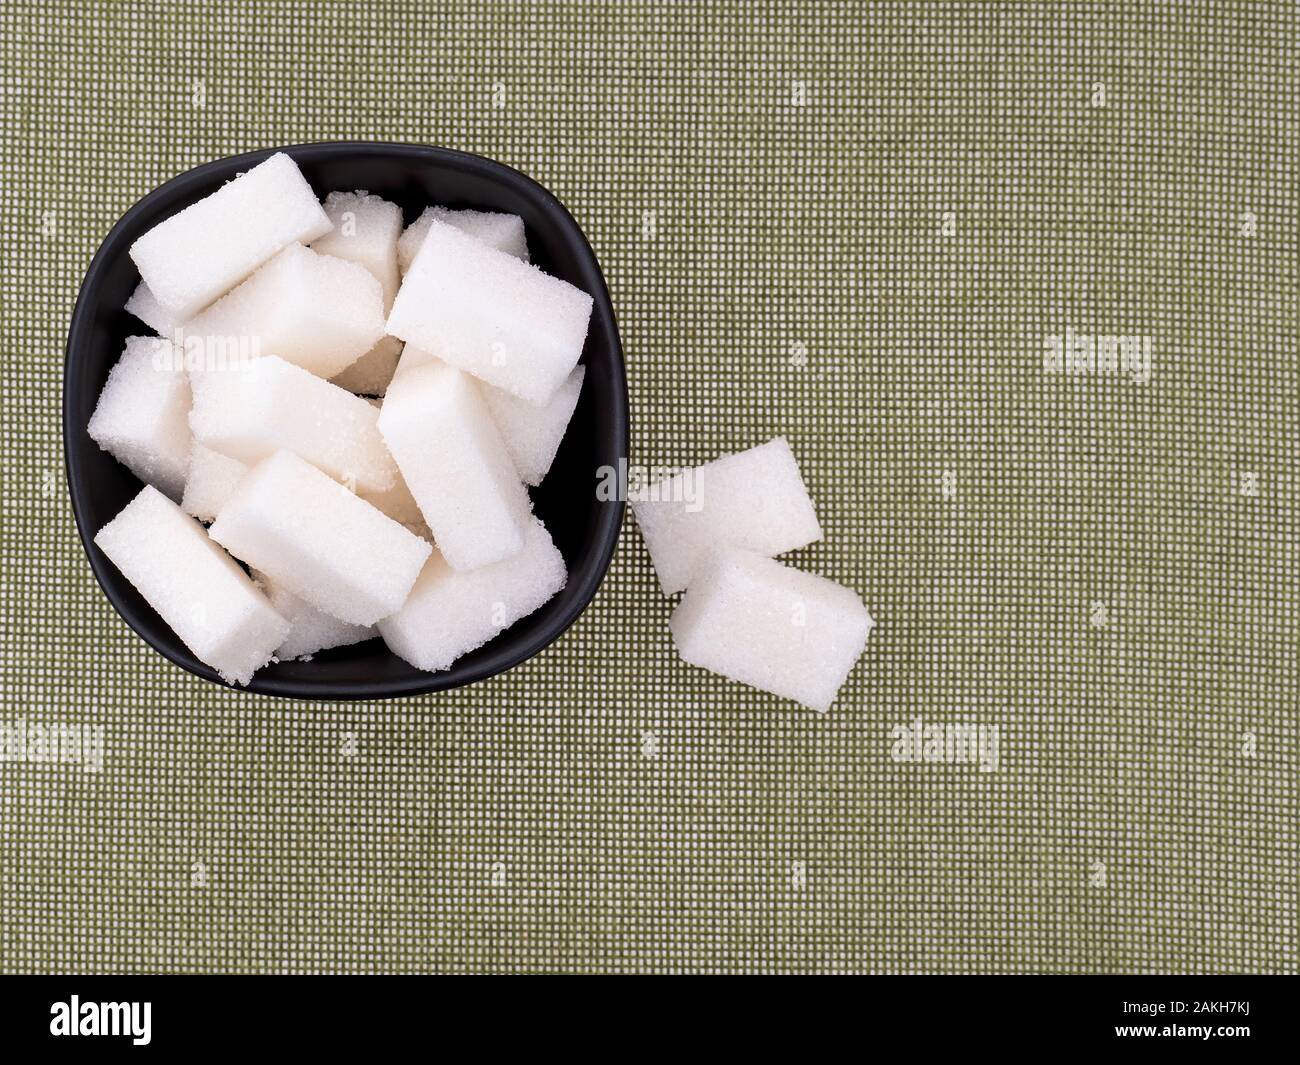 White refined sugar lumps, cubes, in bowl on fabric background with copyspace. Stock Photo